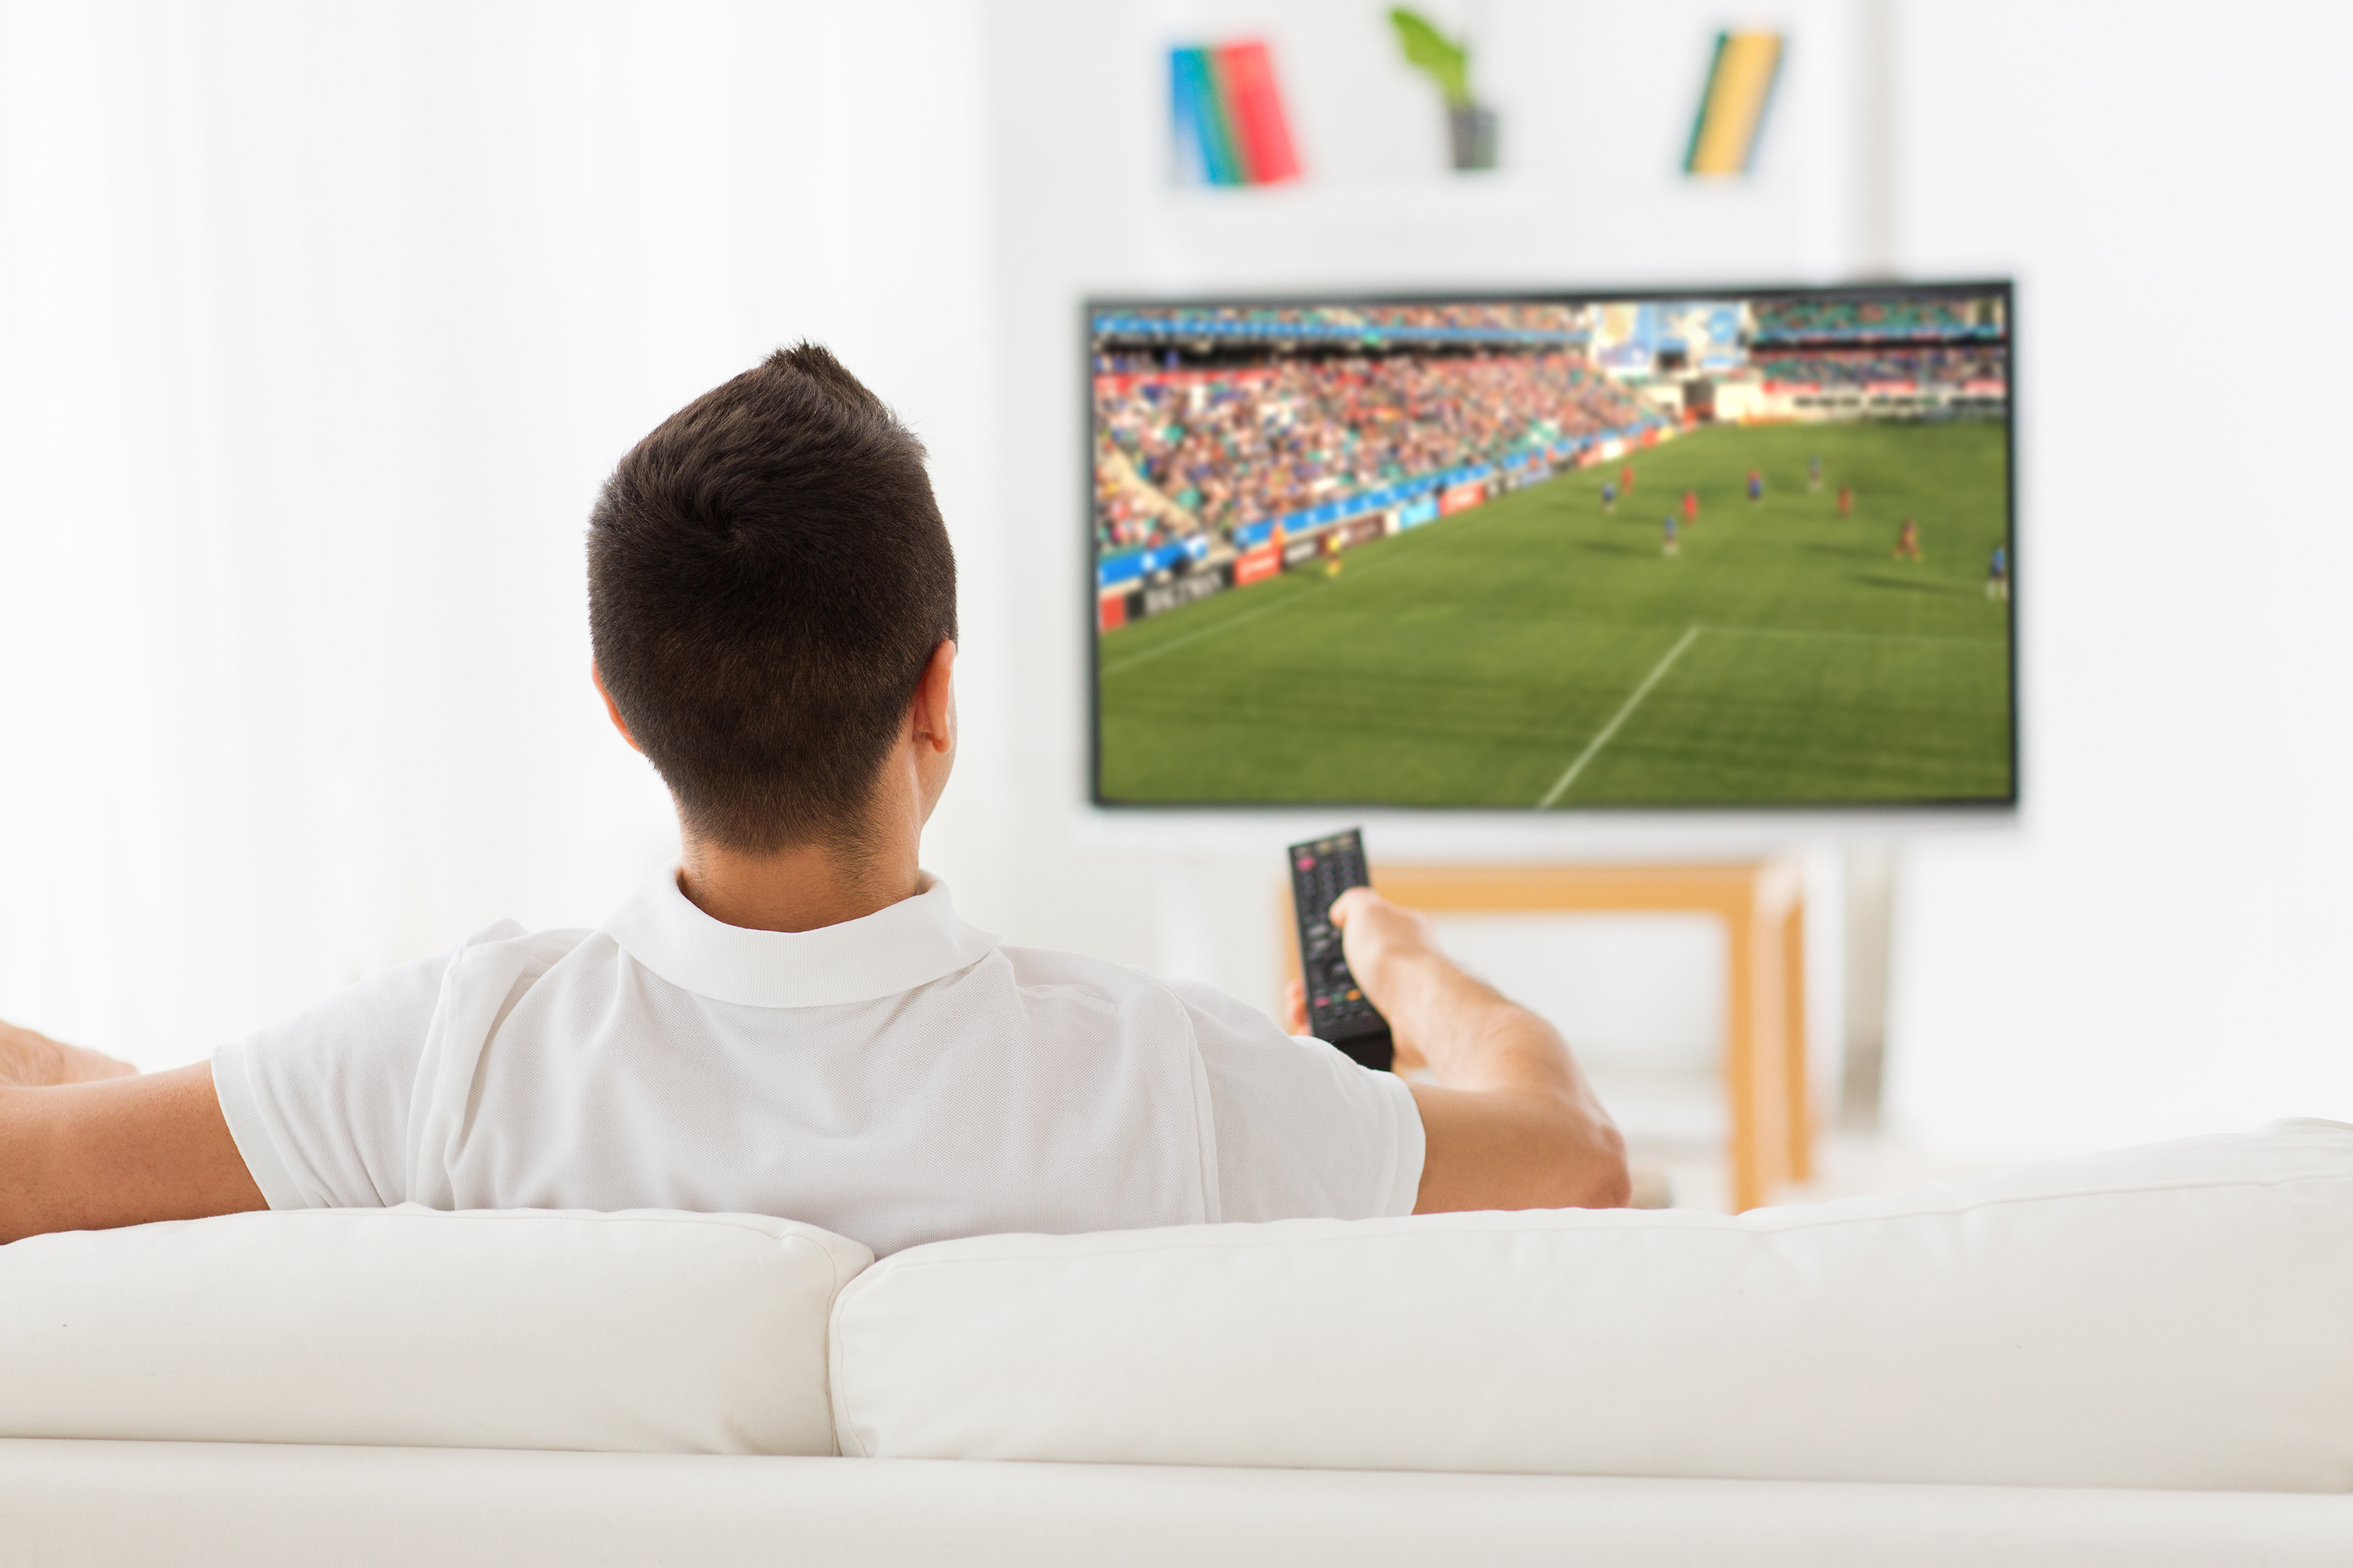 The man was watching TV during the family gathering. | Source: Shutterstock